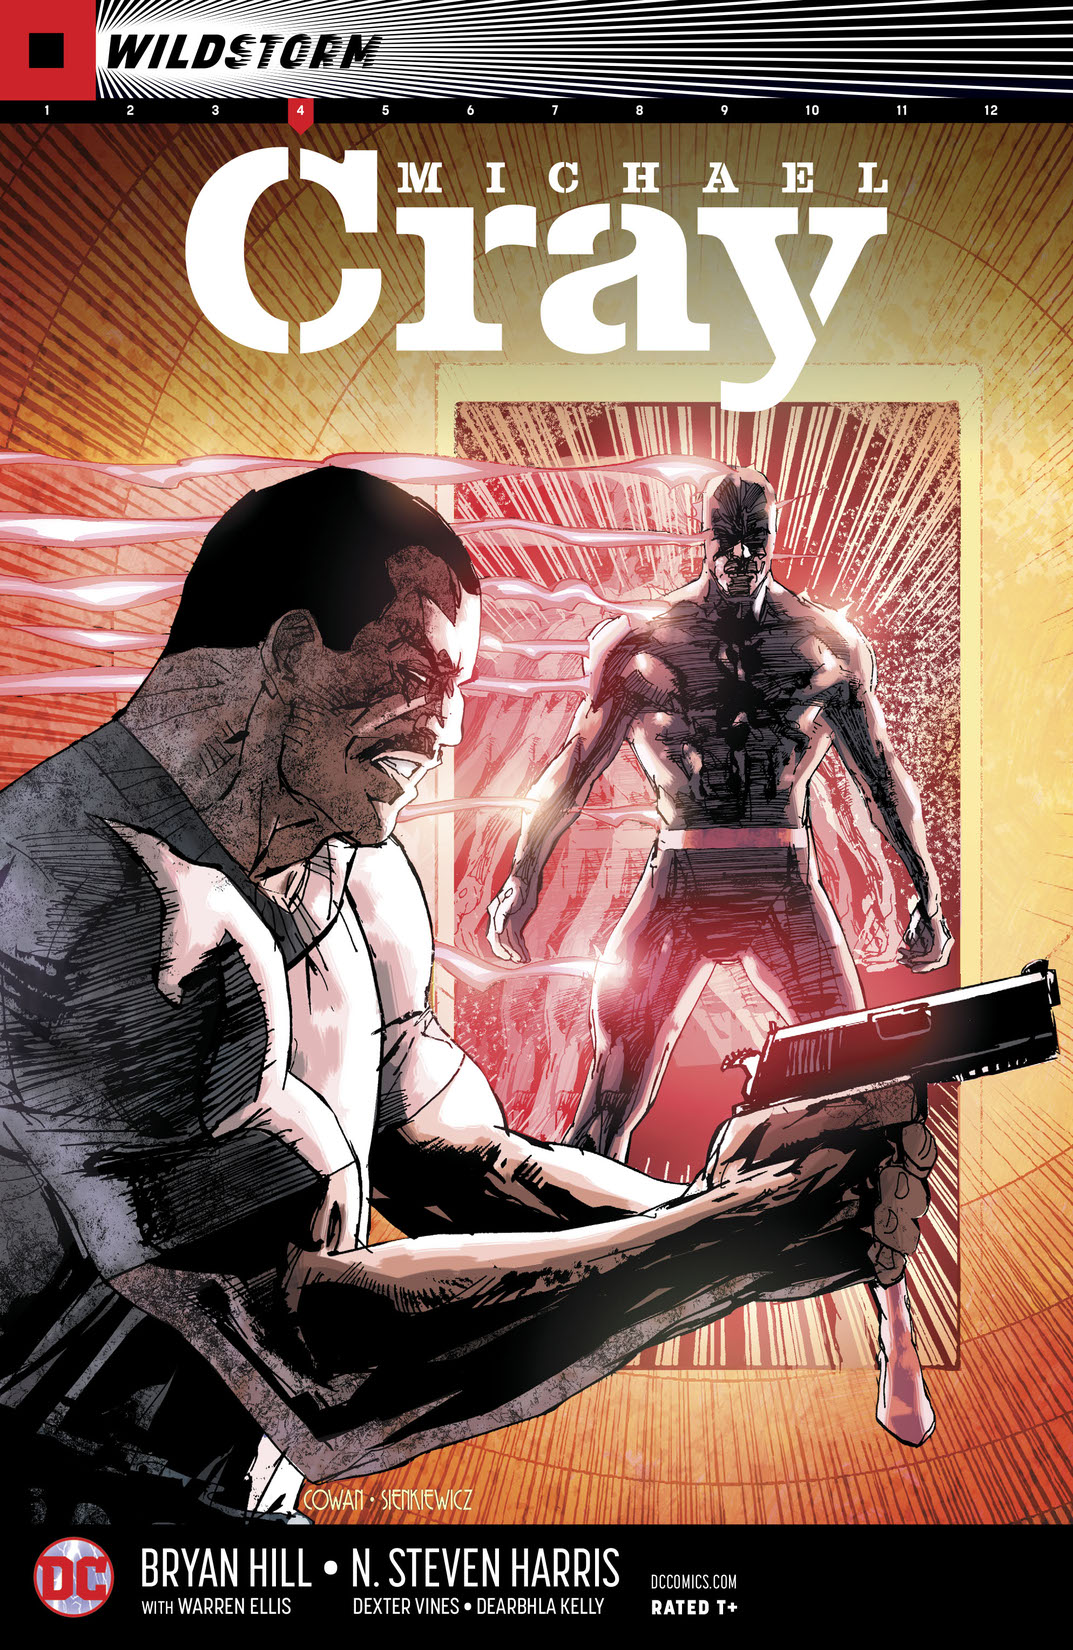 The Wild Storm: Michael Cray #4 preview images